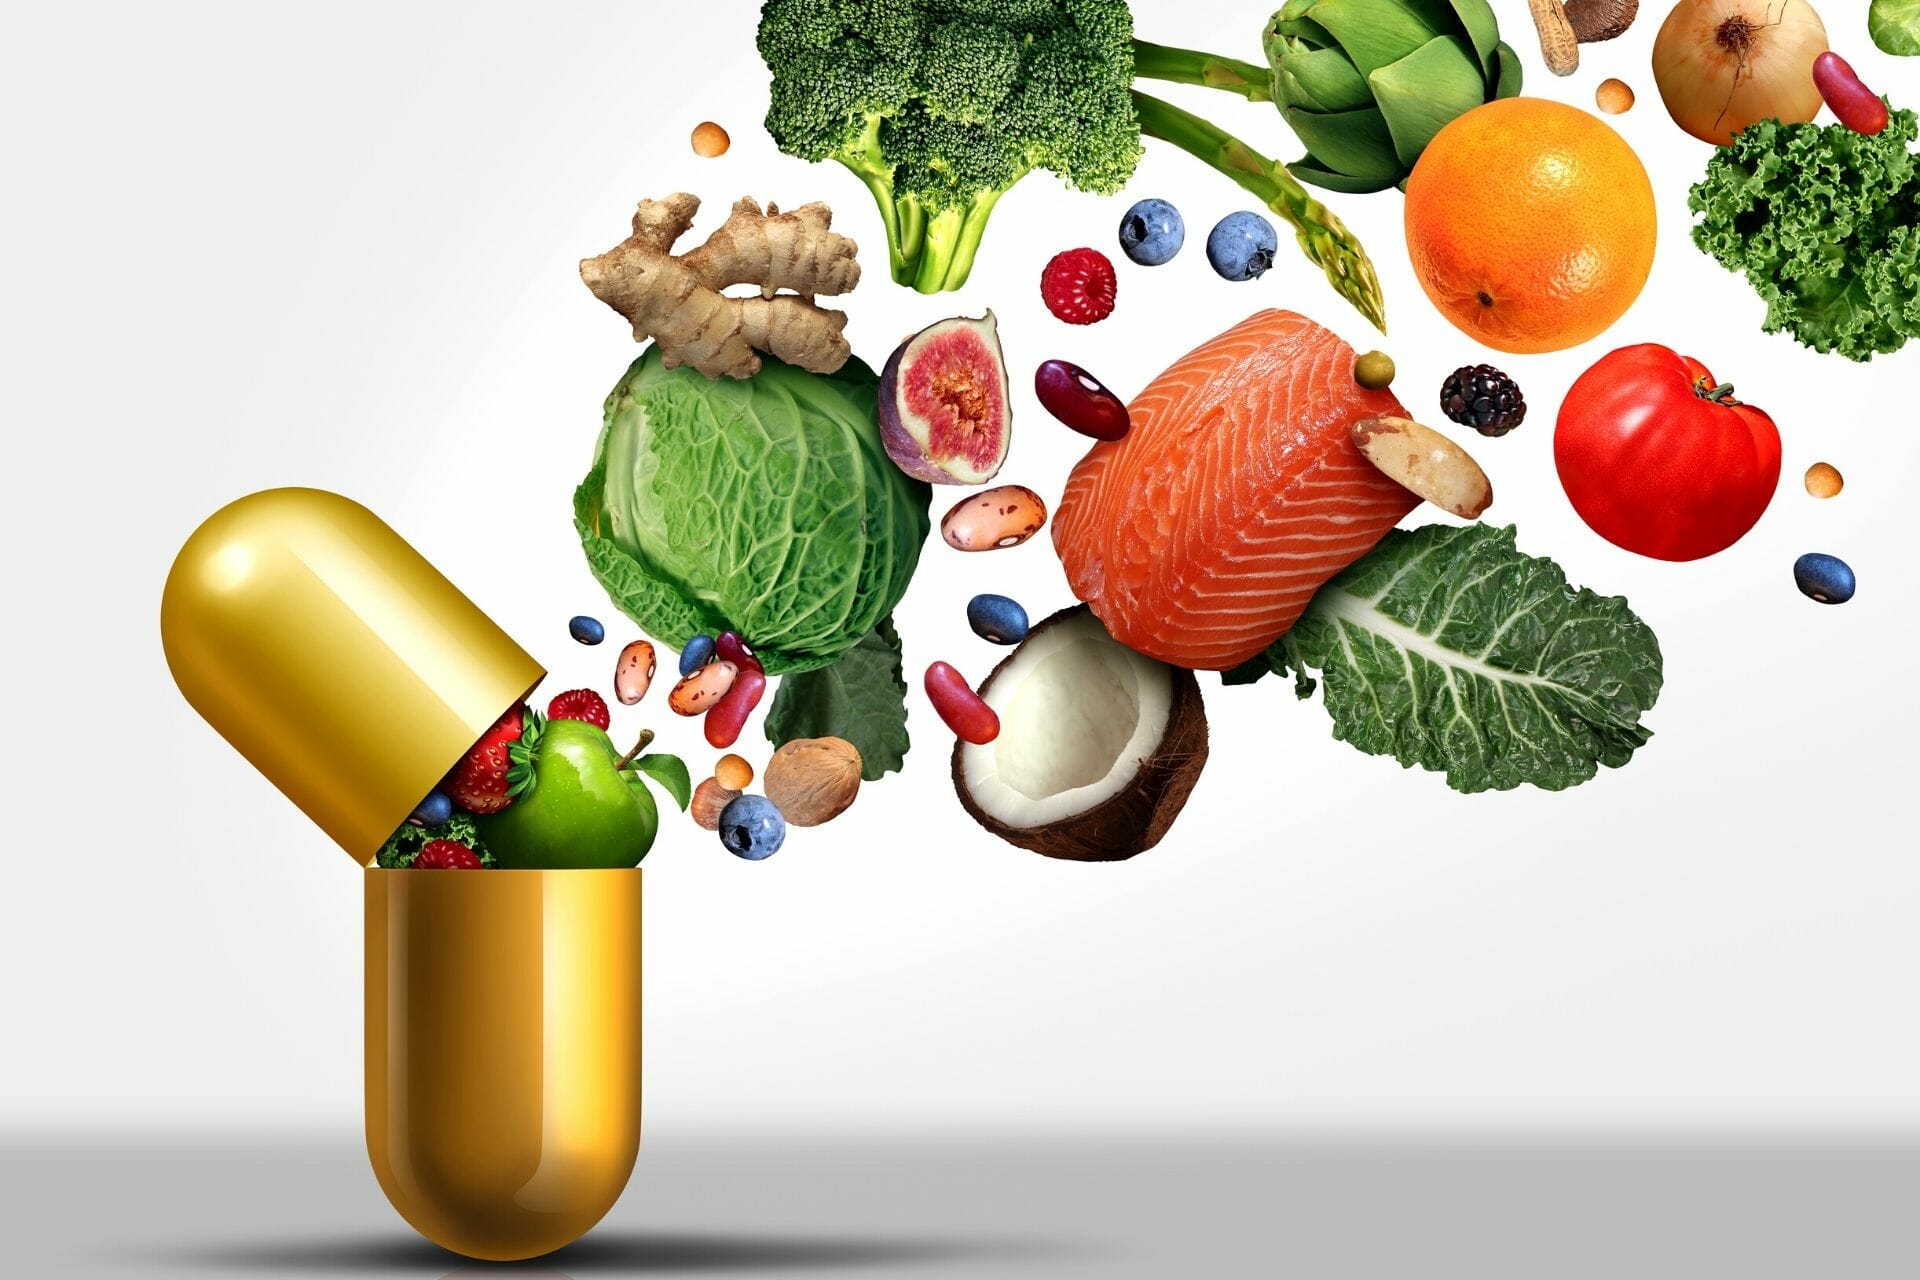 A gold capsule bursting with vitamin-rich fruits and vegetables designed for individuals with Chronic Kidney Disease (CKD).